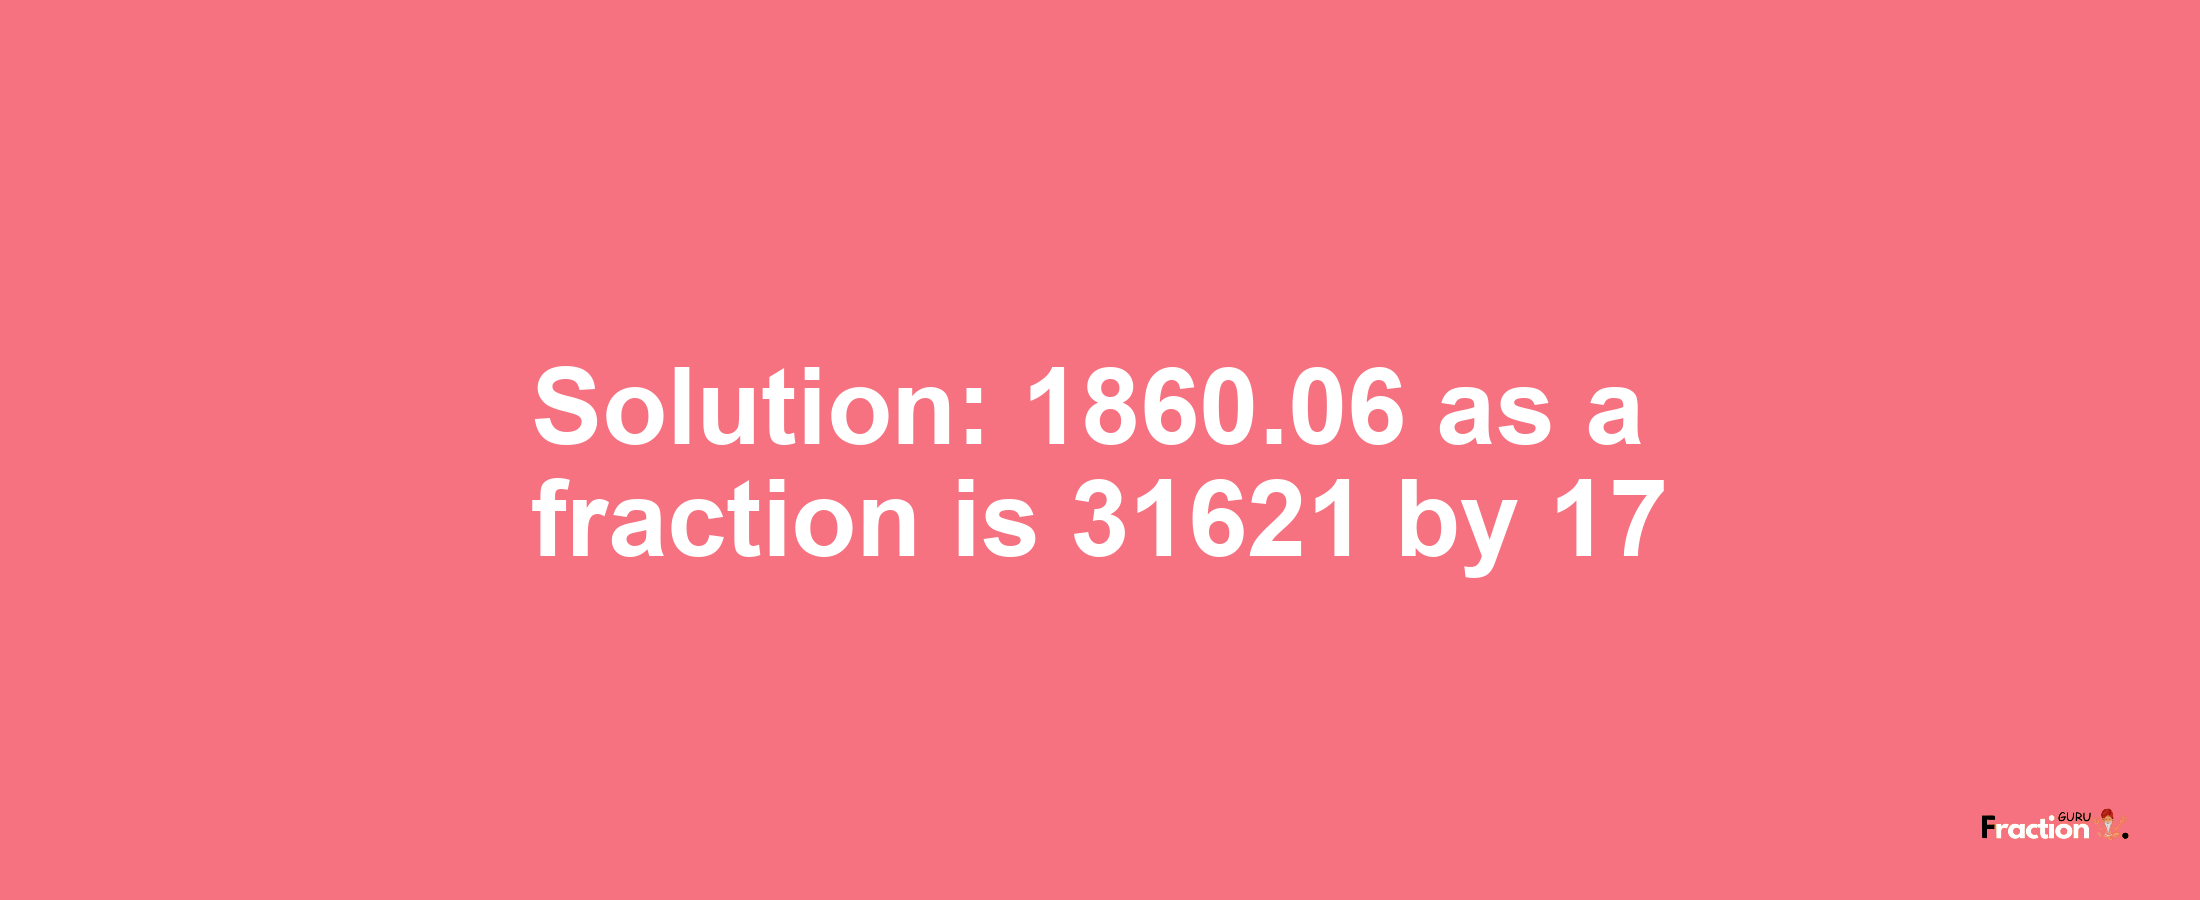 Solution:1860.06 as a fraction is 31621/17